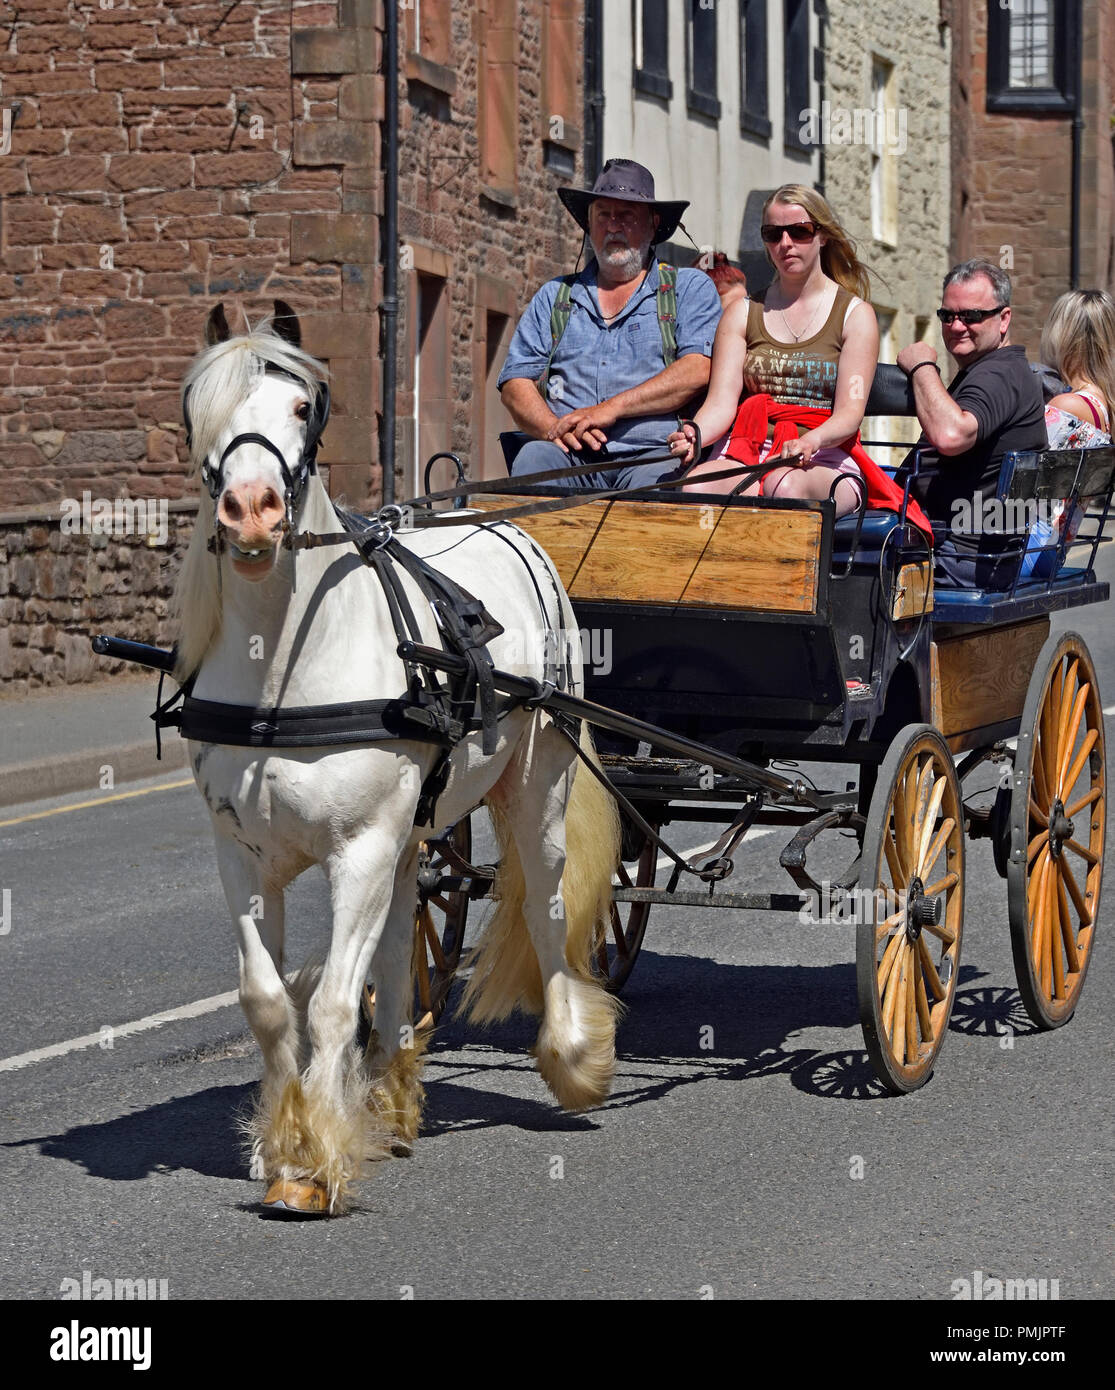 Gypsy Travellers riding on carriage. Appleby Horse Fair 2018. The Sands, Appleby-in-Westmorland, Cumbria, England, United Kingdom, Europe. Stock Photo